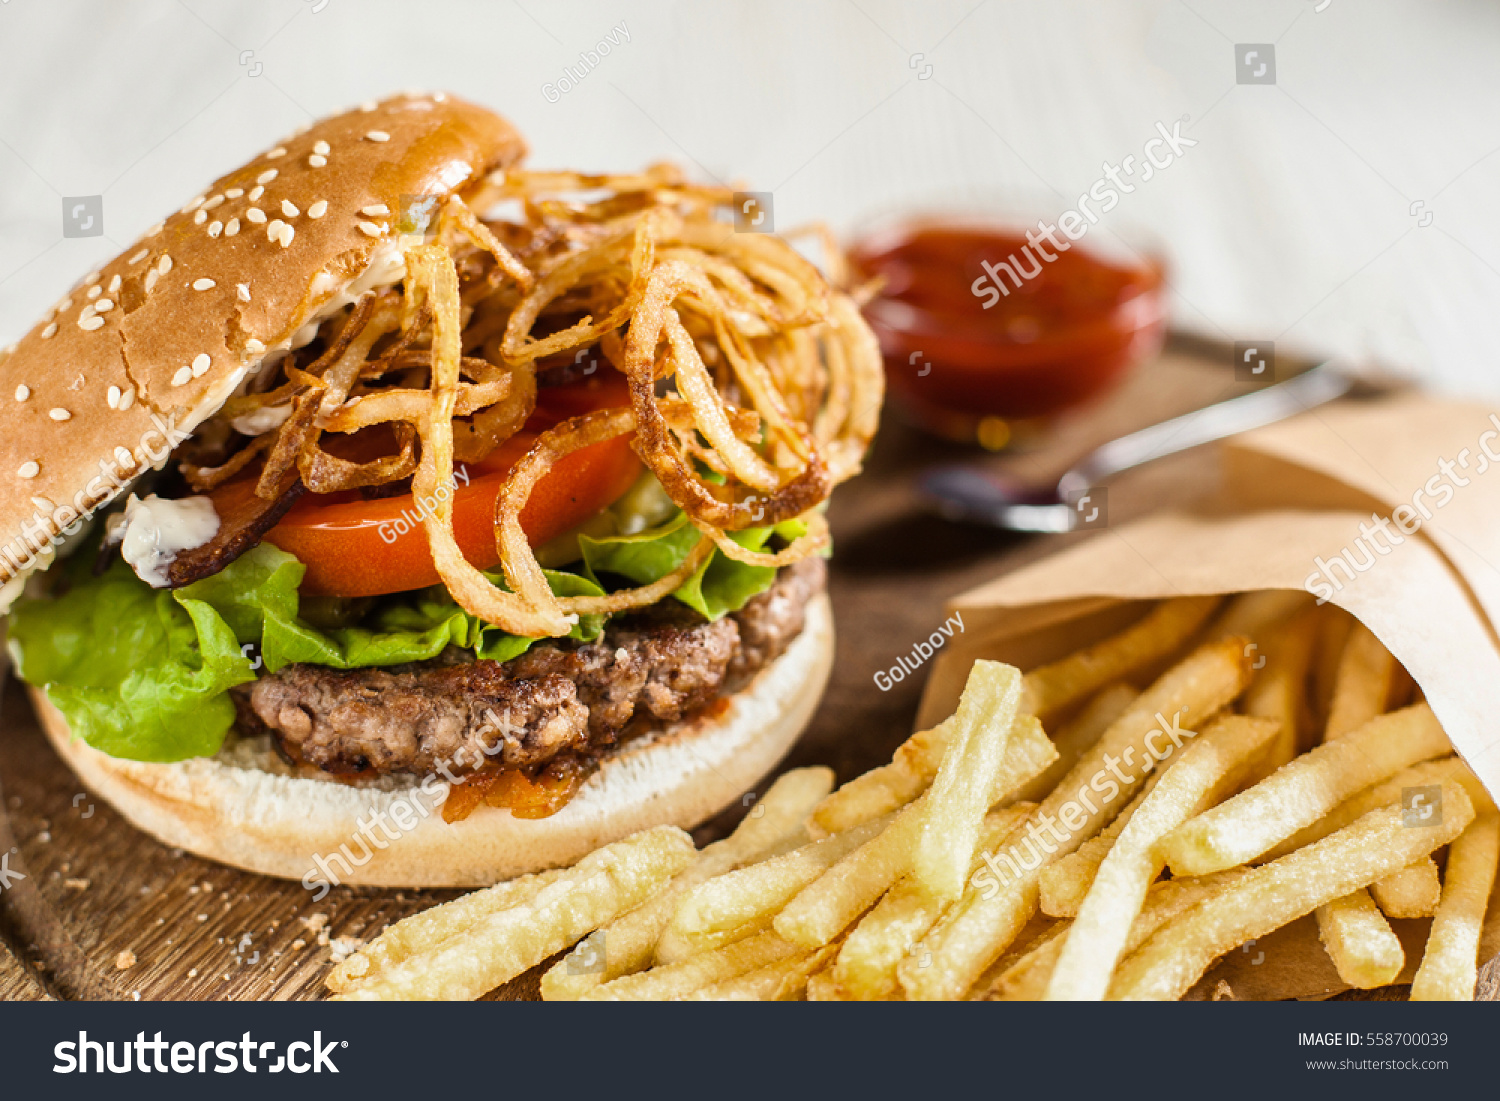 Restaurant serving of burger with fries and ketchup. Side view on catering platter with traditional american snack. Fast junk food, dining, fat eating concept #558700039